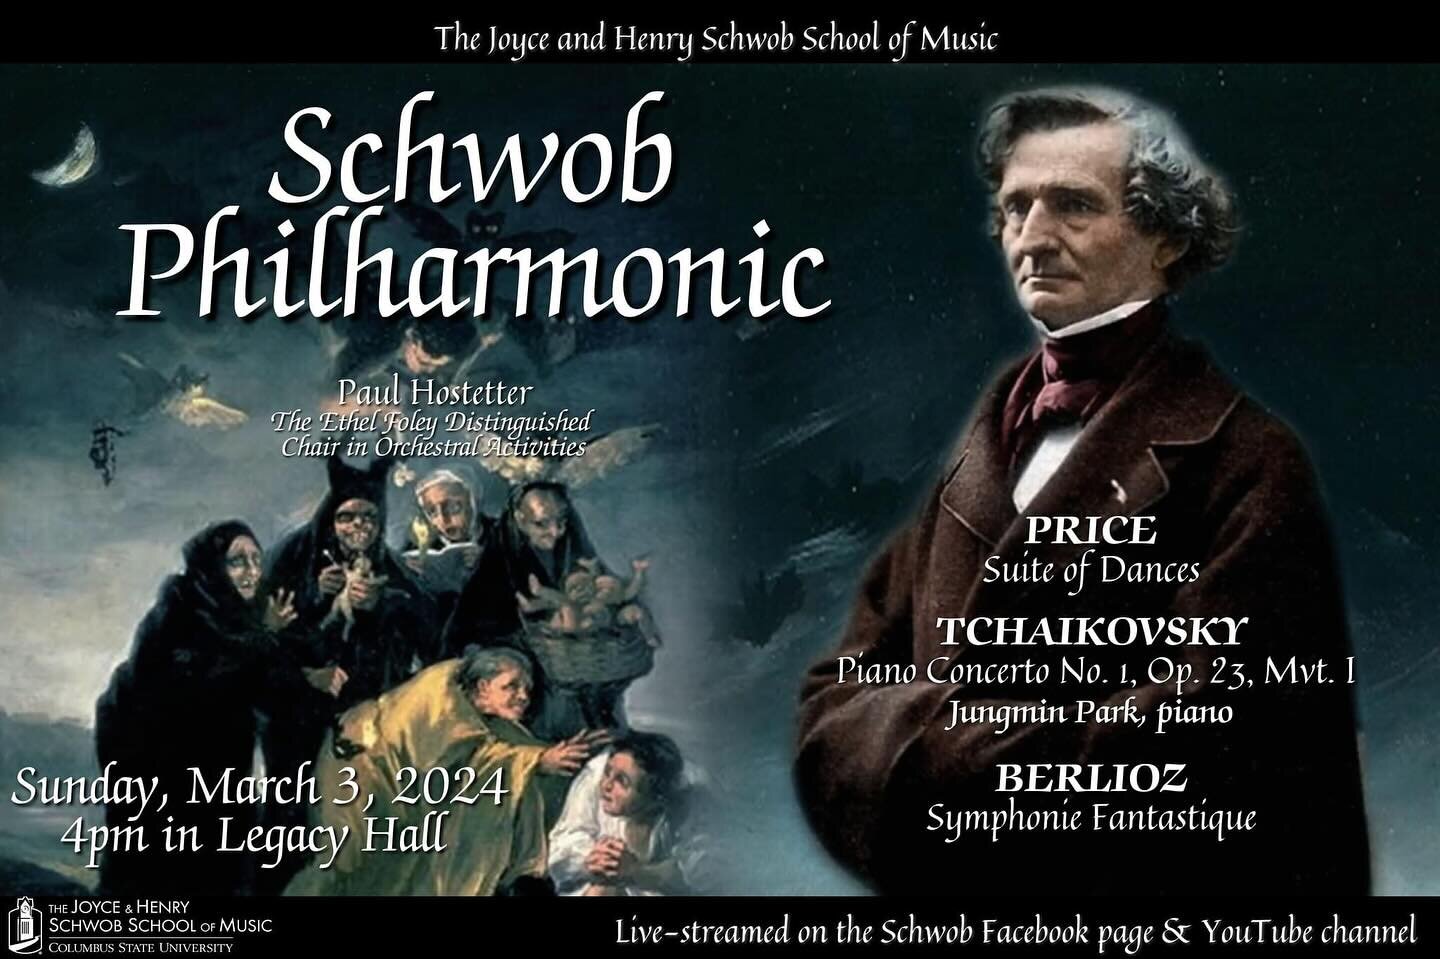 🛎️ You don&rsquo;t want to miss the Schwob Philharmonic concert this Sunday March 3, 4 pm in Legacy Hall! 
Follow the Schwob School of Music Facebook and YouTube channels for the live steam! 

#schwoboes 
#schwobmusic 
#columbusstate